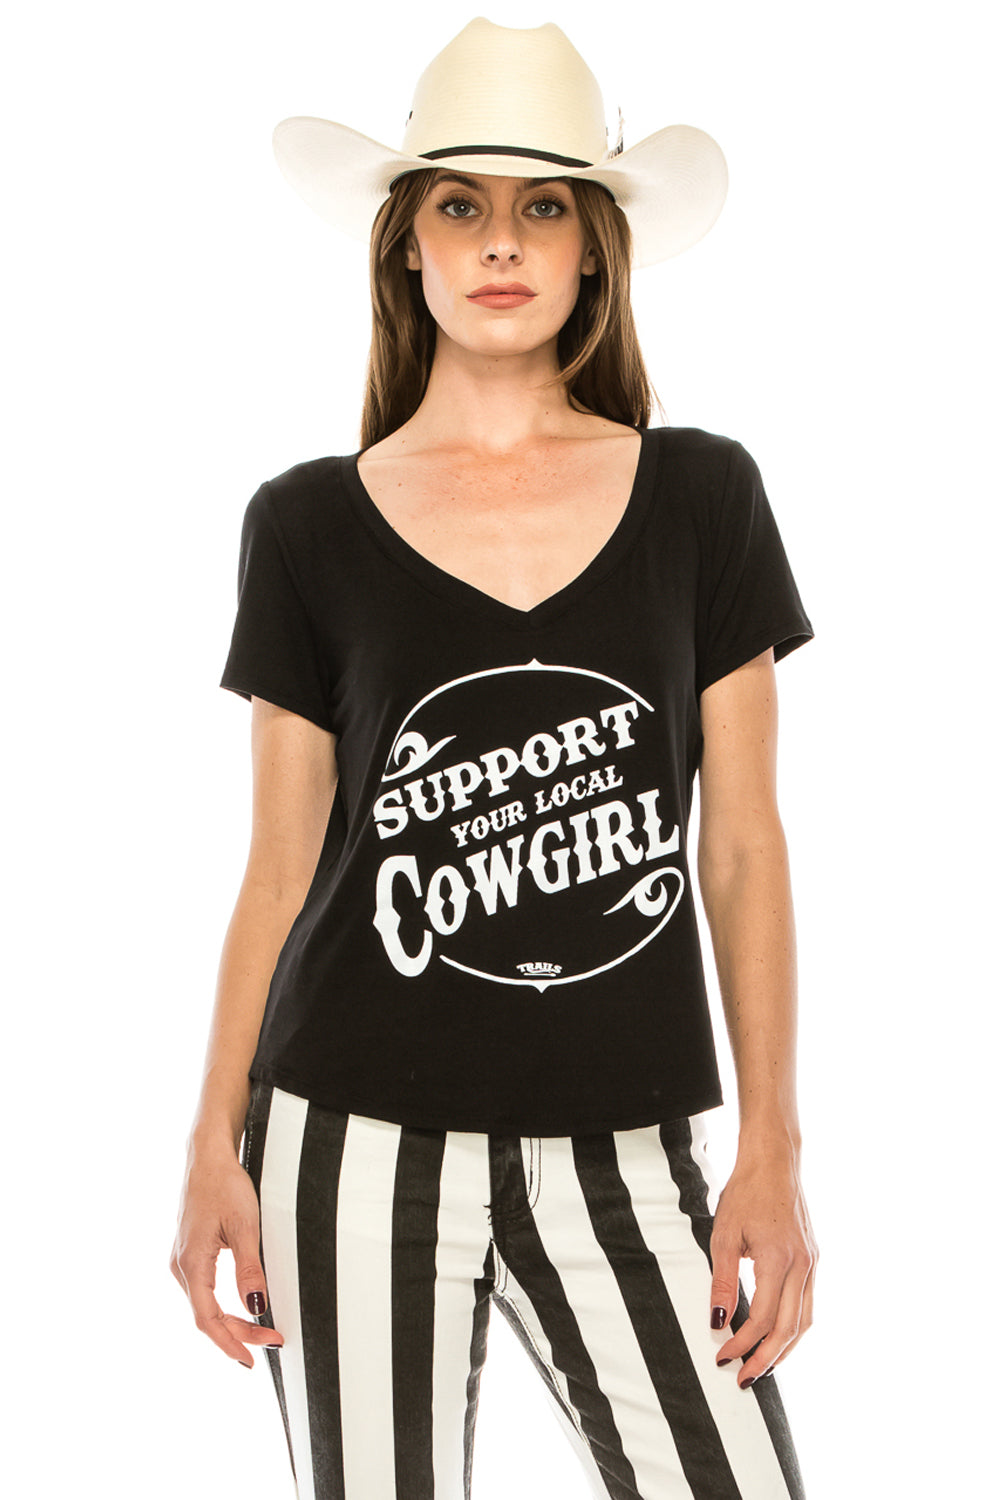 SUPPORT YOUR LOCAL COWGIRL V NECK TOP